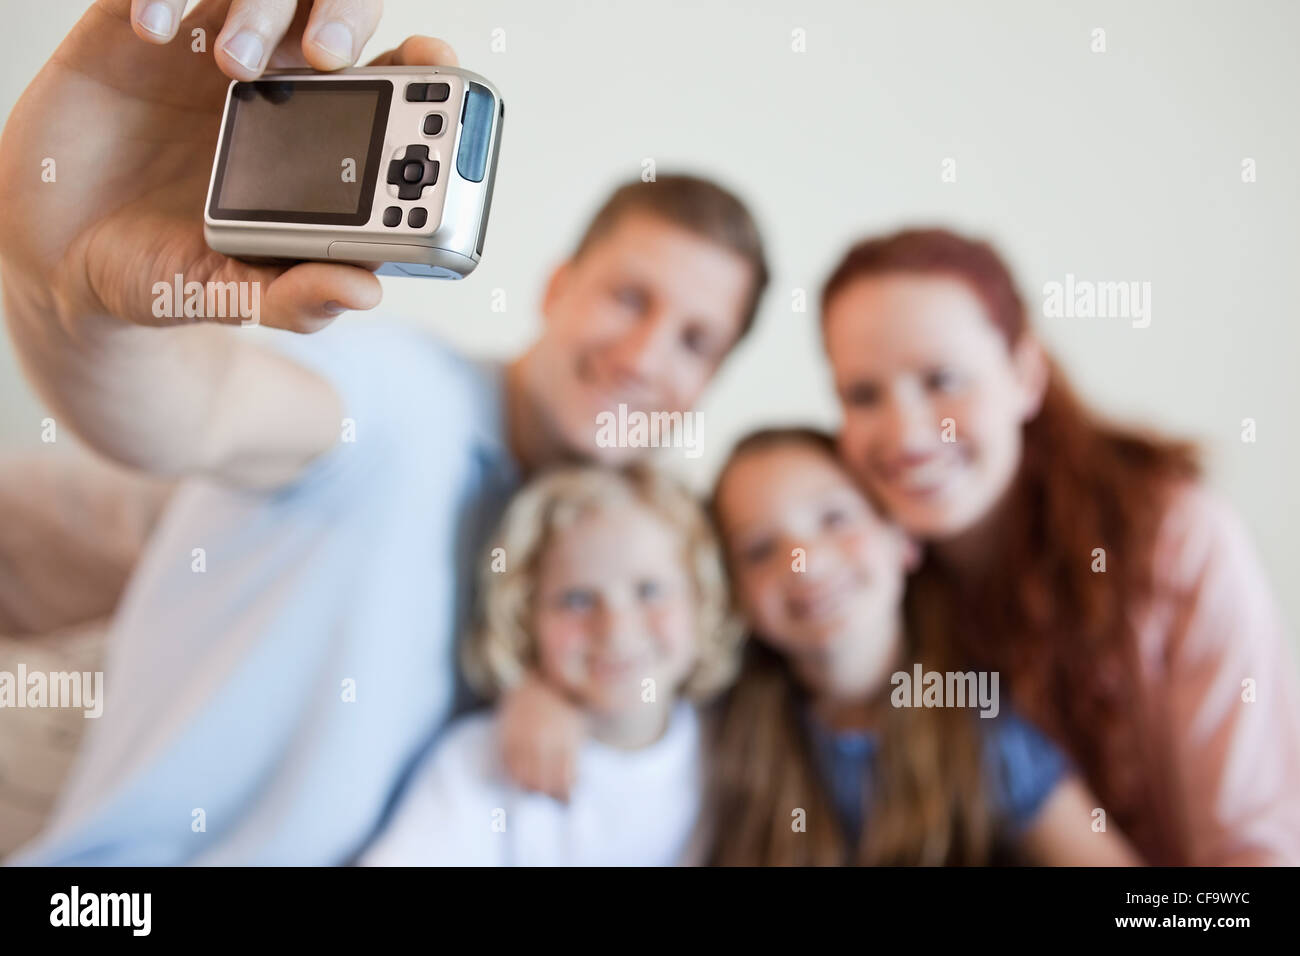 Digi cam being used to take picture Stock Photo